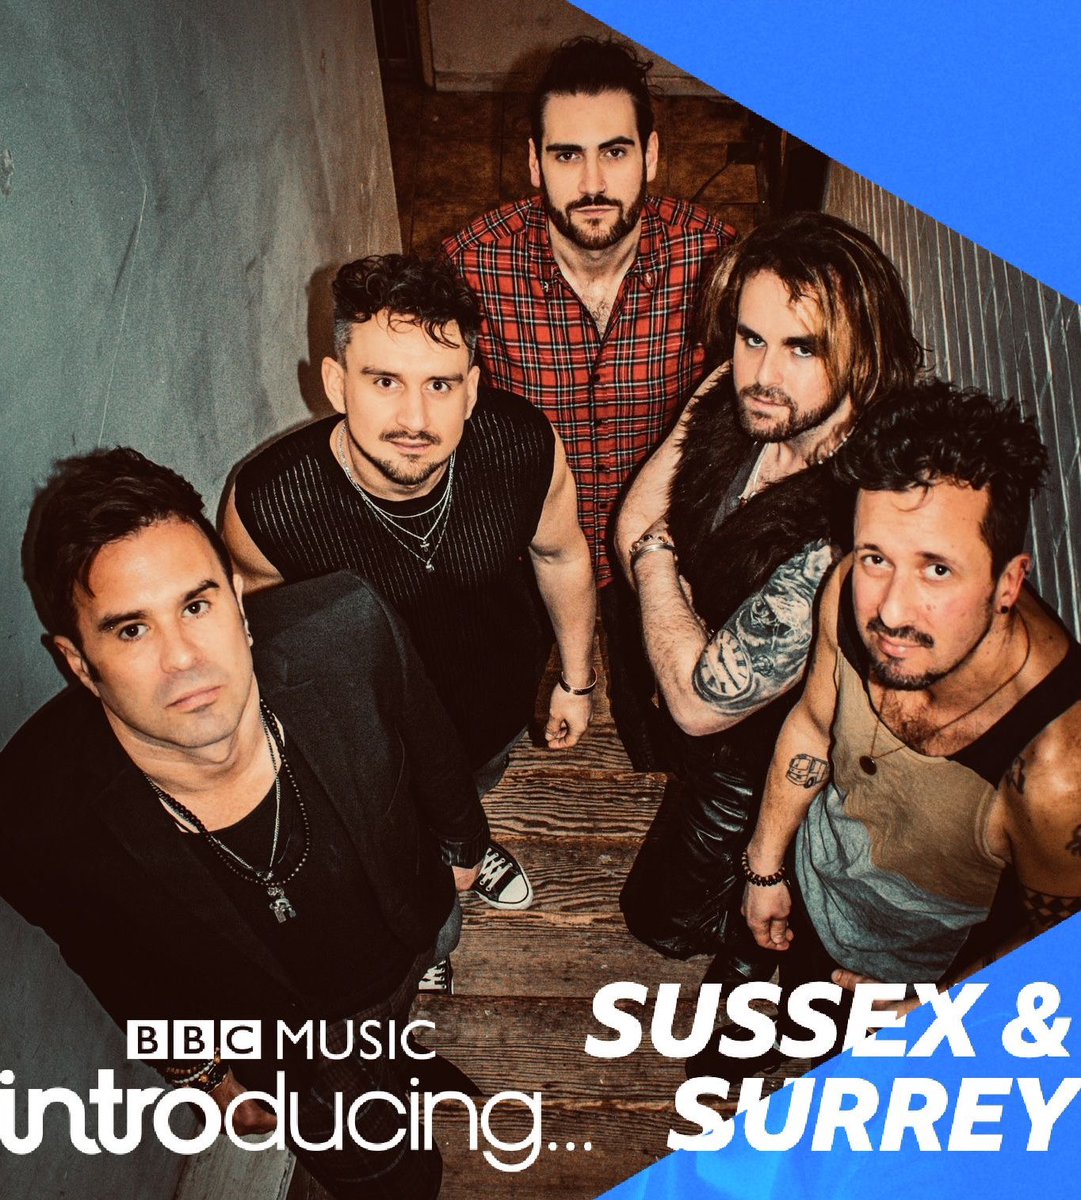 ‘Vice’ is being played on @bbcintroducing Sussex & Surrey, 8-10pm this Thursday by the awesome @MelitaRadio Listen on @BBCSounds: bbc.co.uk/sounds/play/li…   Text in during the show (start texts with word ‘radio’) on 81333 (normal rates apply) with ur name for a shout out! ❤️🙏